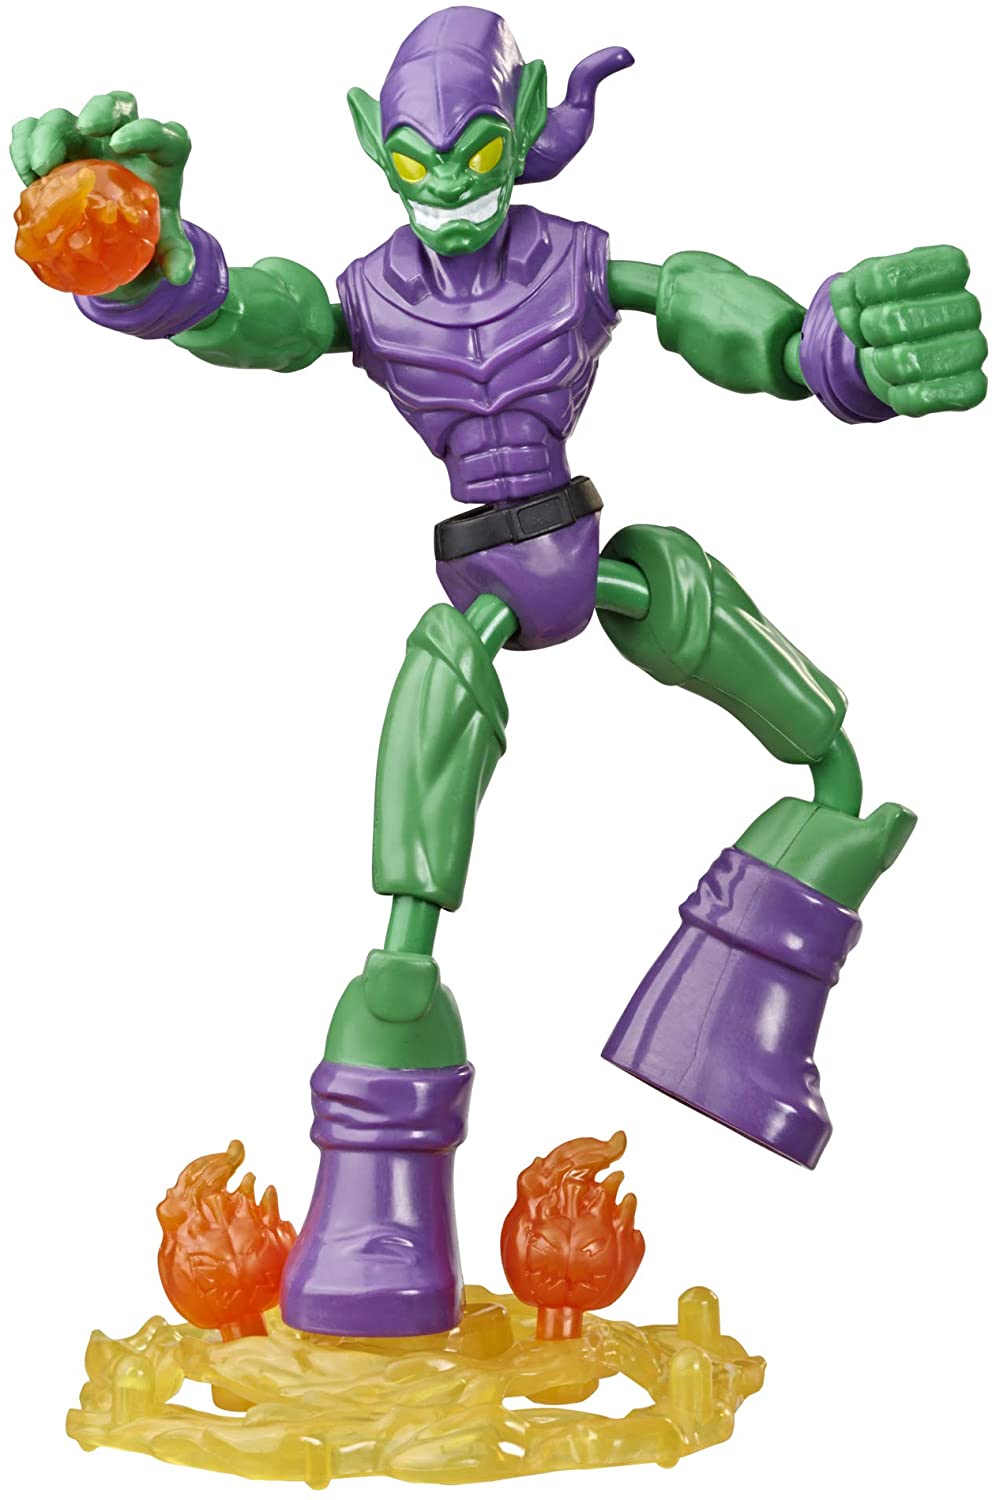 Spider-Man Marvel Bend and Flex Green Goblin Action Figure Toy 6-Inch Flexible Figure